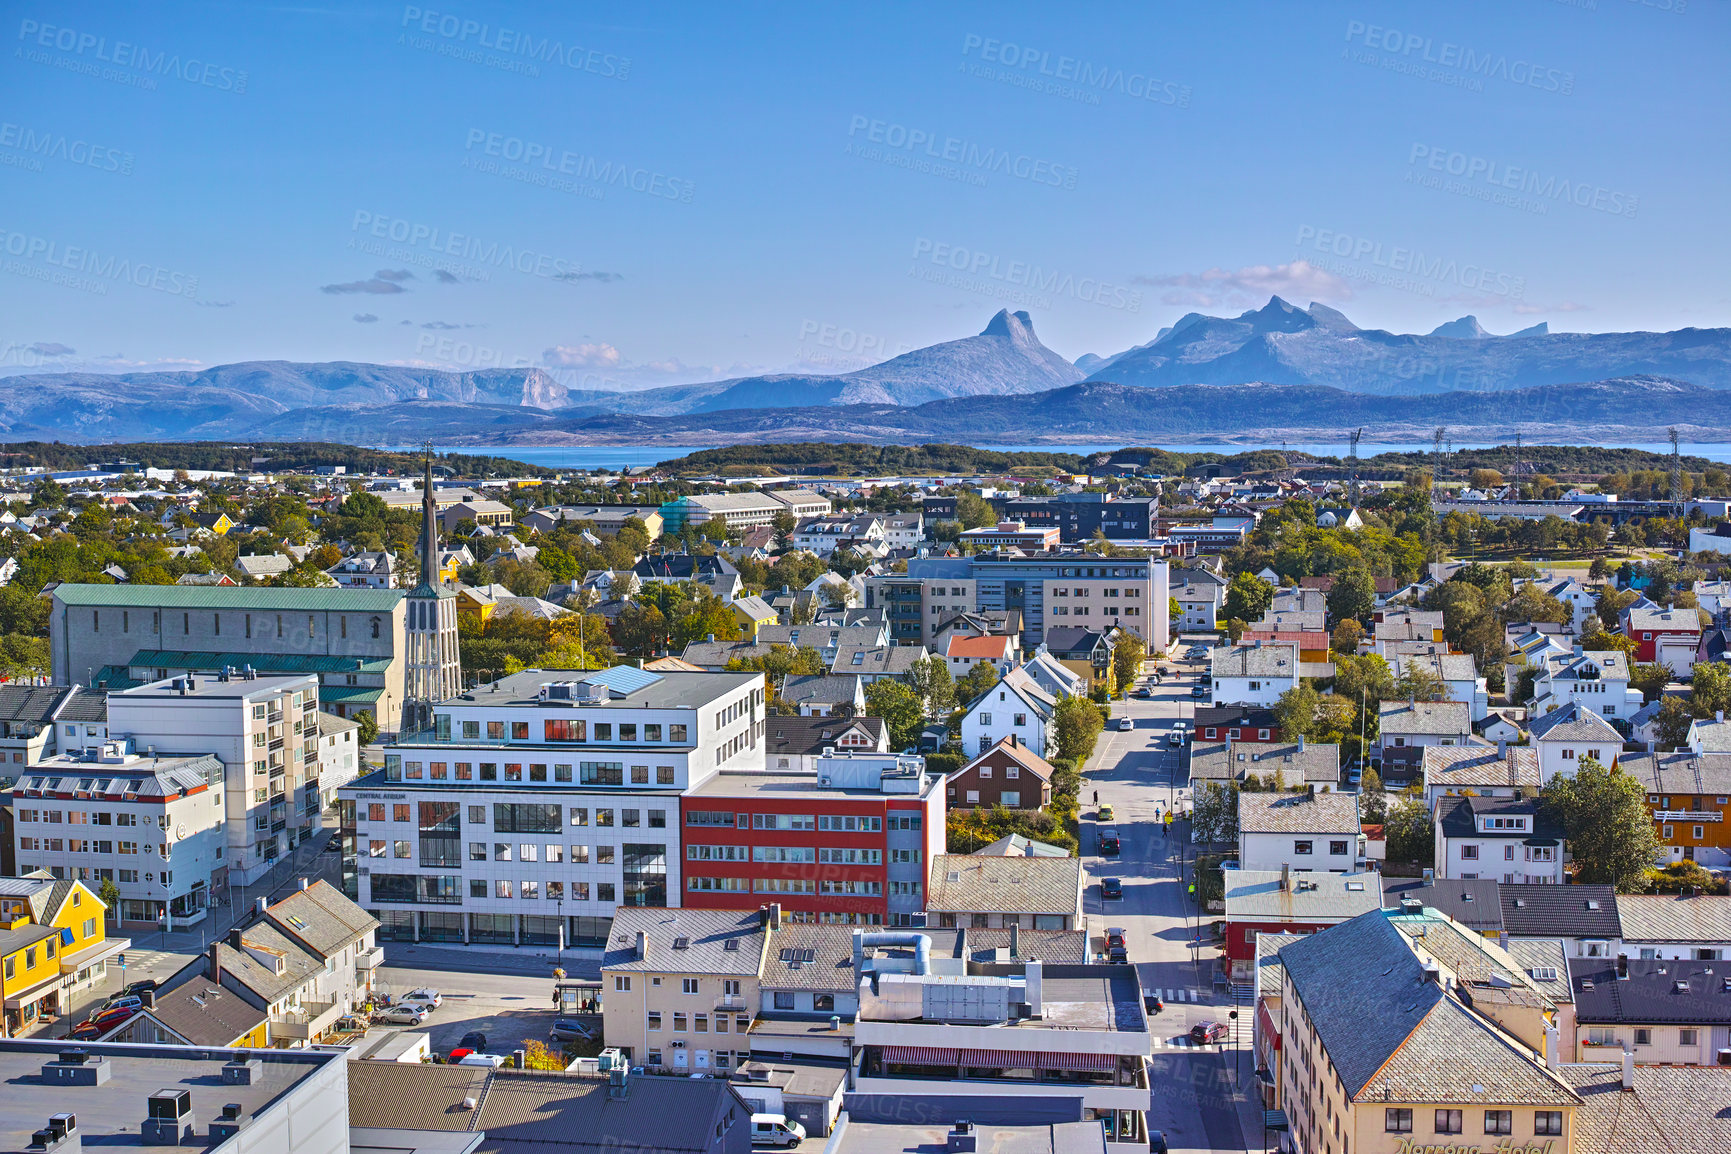 Buy stock photo Aerial view of Bodo city in Norway on a sunny day with a blue sky. Scenic modern urban landscape of streets and buildings near a mountain horizon with copy space. Peaceful rural town from above